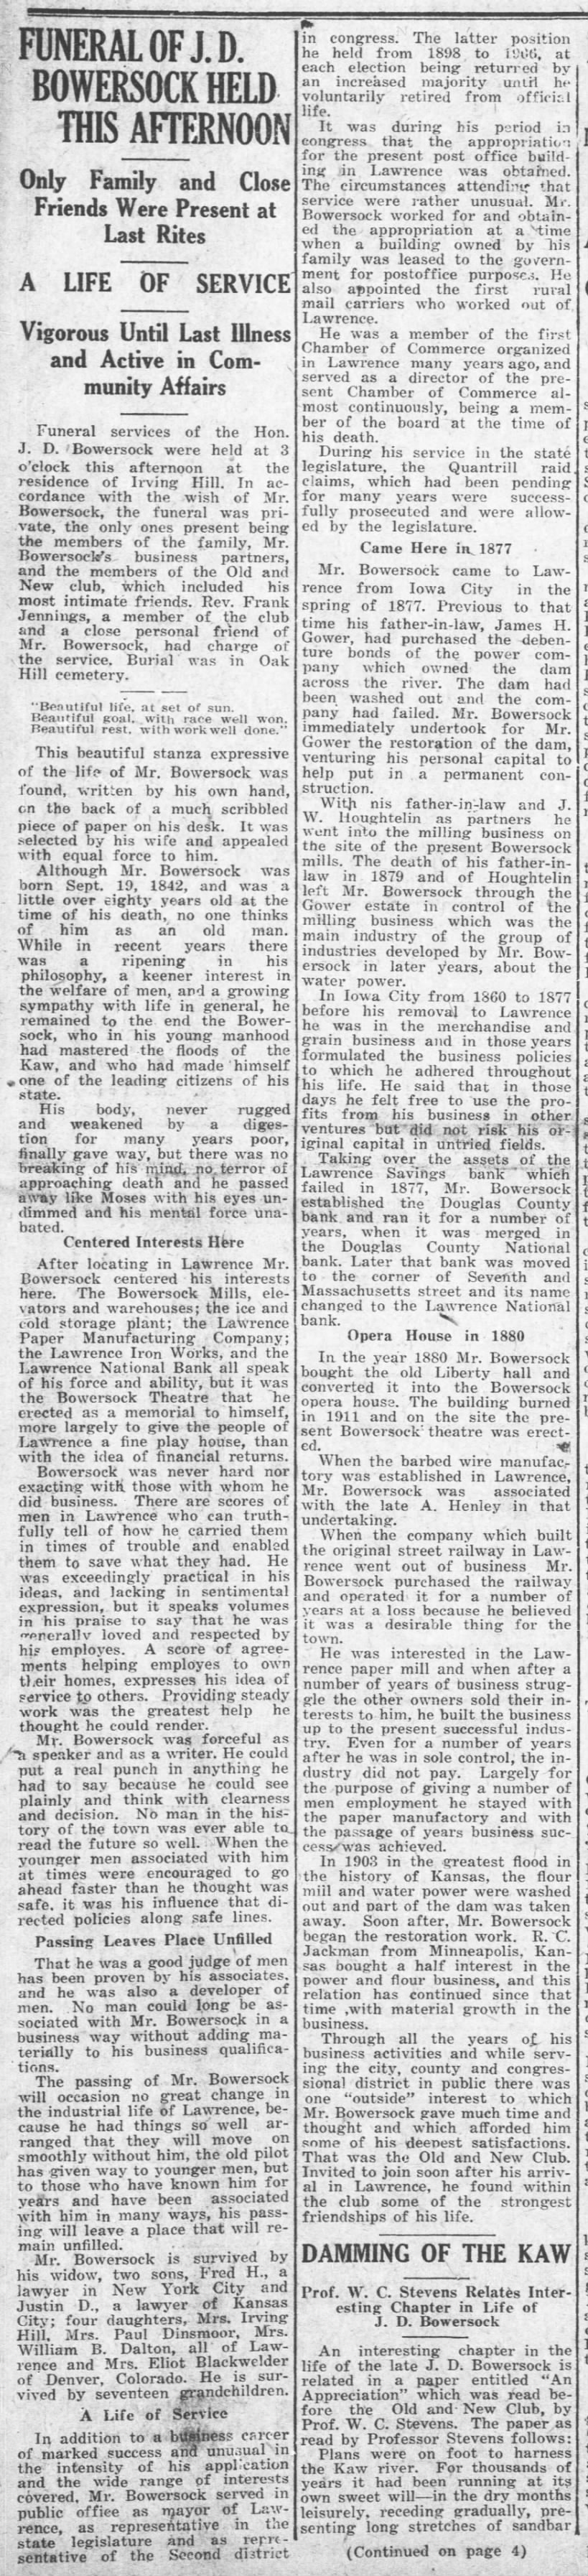 Funeral of J. D. Bowersock Held This Afternoon; 28 Oct 1922; Lawrence Daily Journal-World; 1